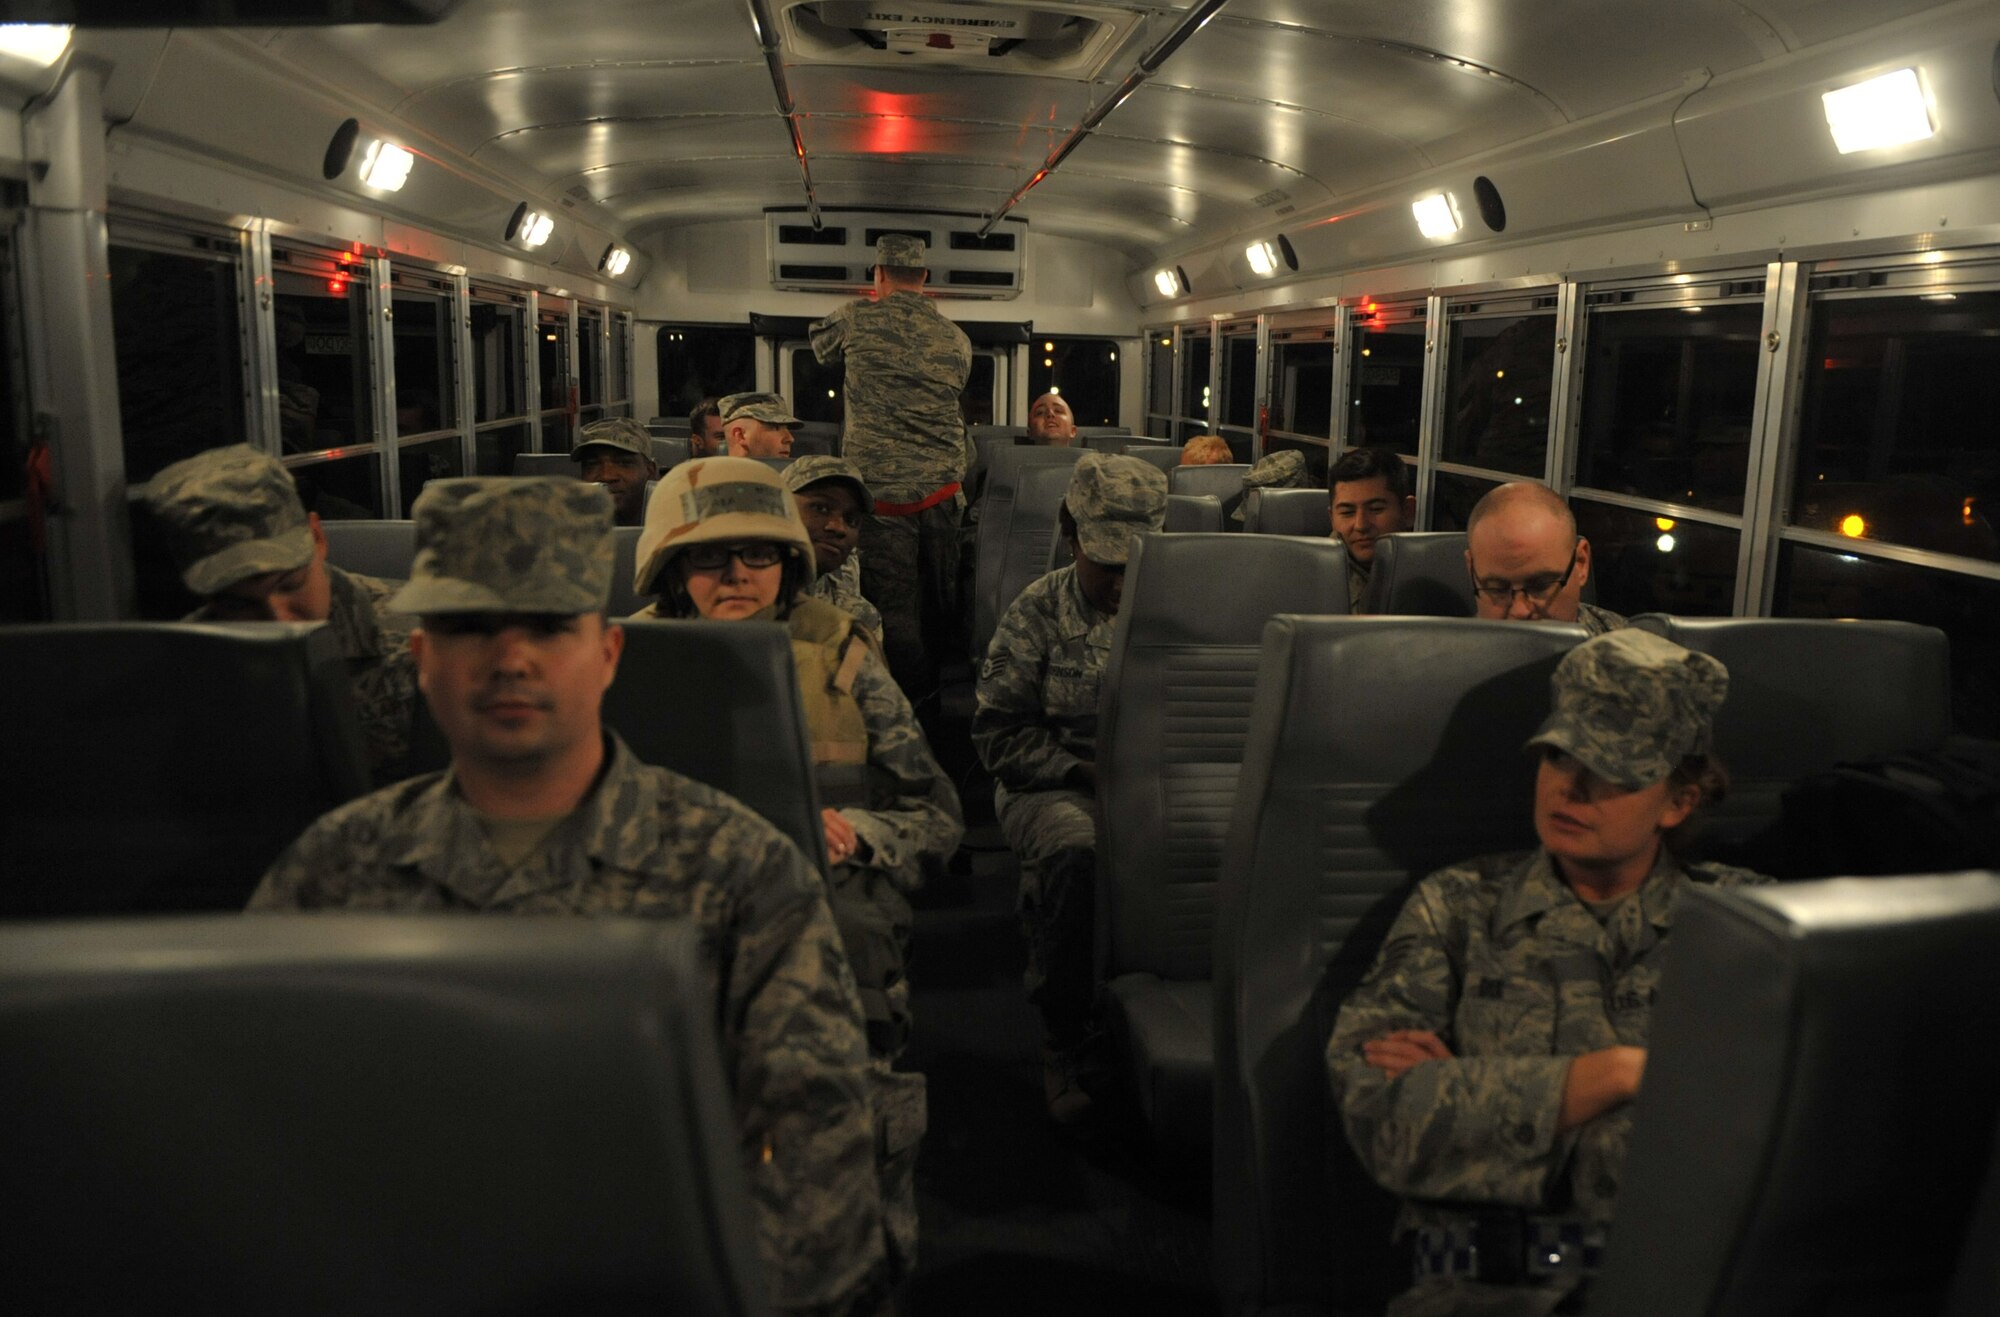 U.S. Air Force members ride a bus to a parking lot with their vehicles during an operational readiness exercise, April 11, 2013, at Mountain Home Air Force Base, Idaho. To add realism to the exercise, participating Airmen must “deploy” on the buses into the exercise area without their vehicles or other conveniences. (U.S. Air Force photo/Senior Airman Heather Hayward)